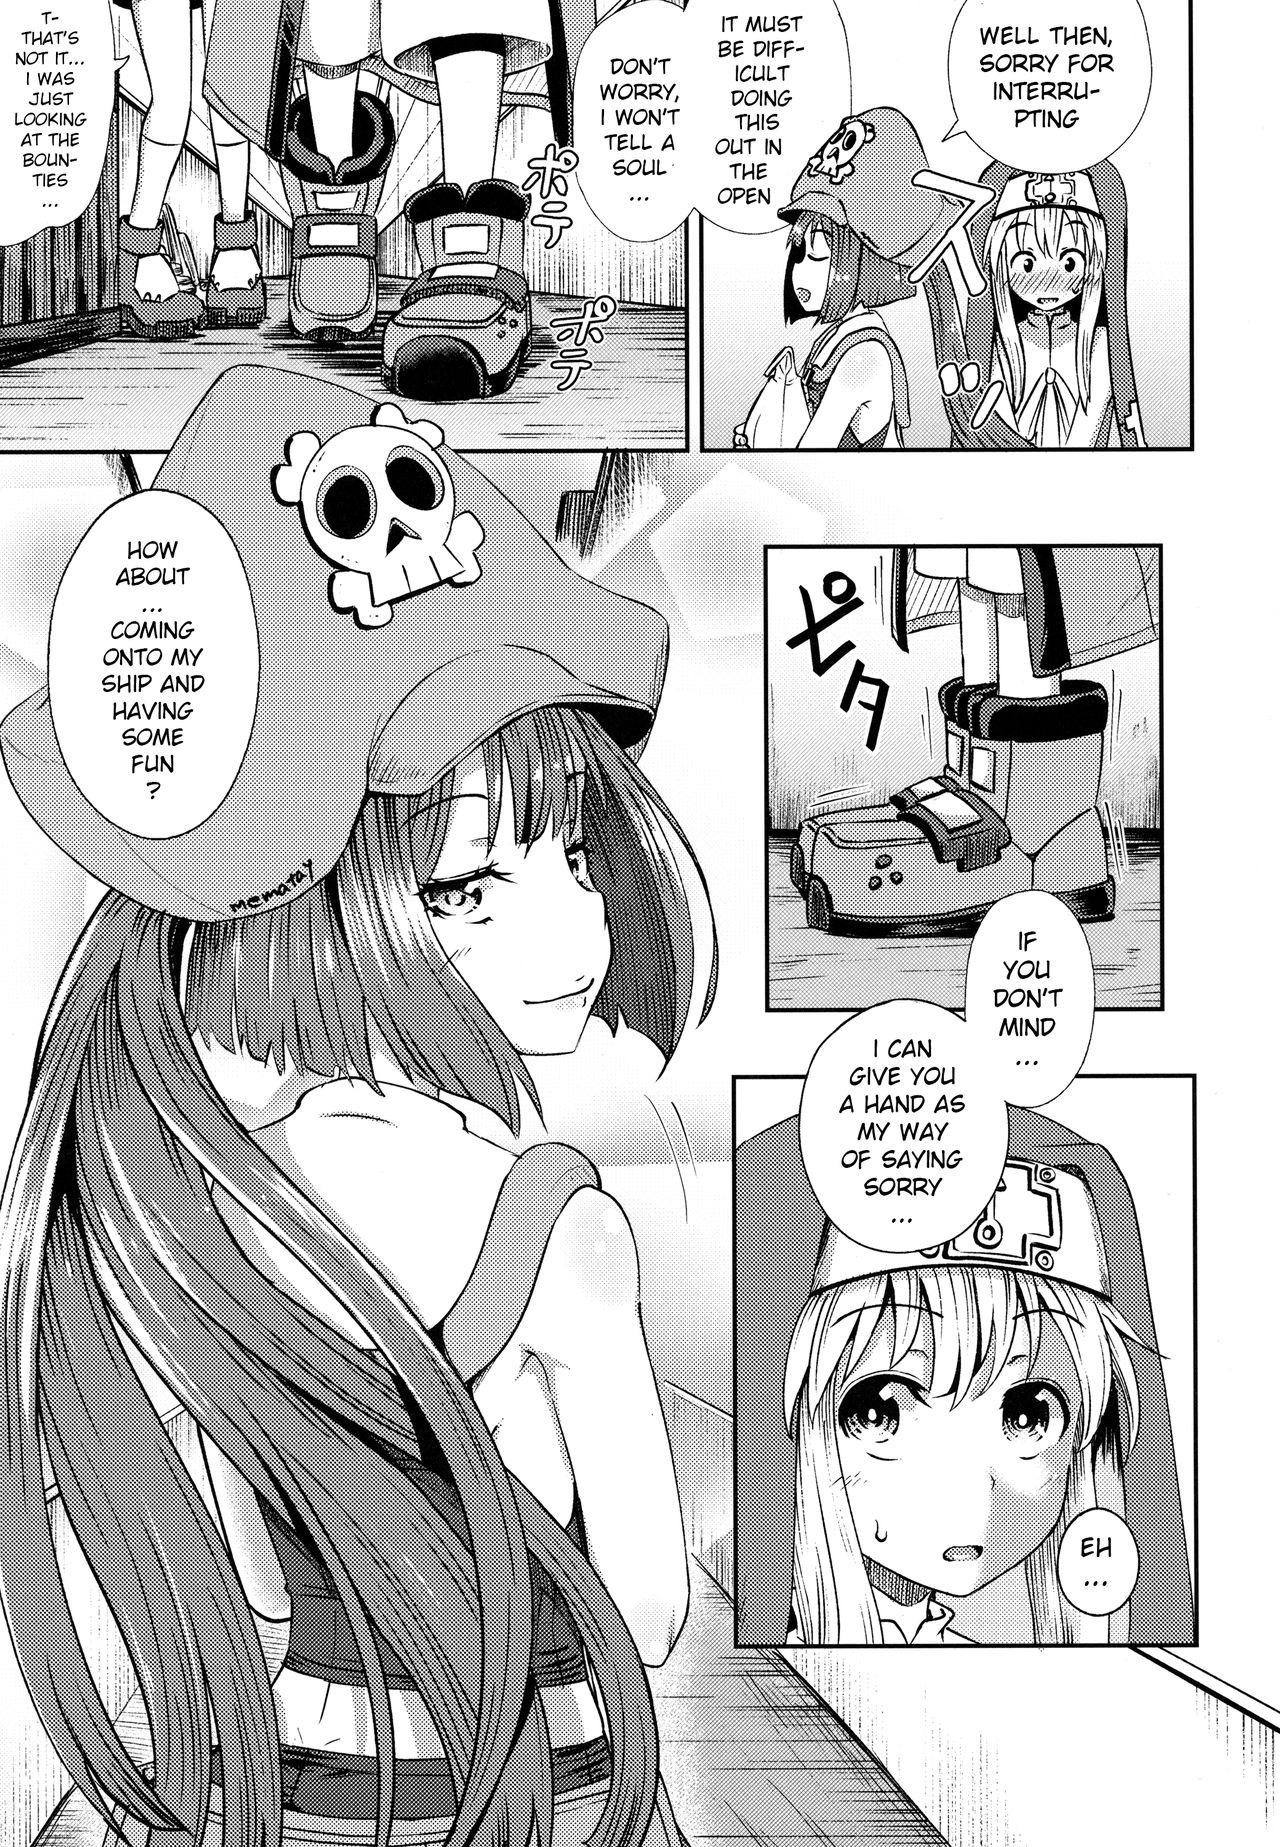 Face Fucking MayBri Shasei Gaman Game - Guilty gear Mother fuck - Page 4